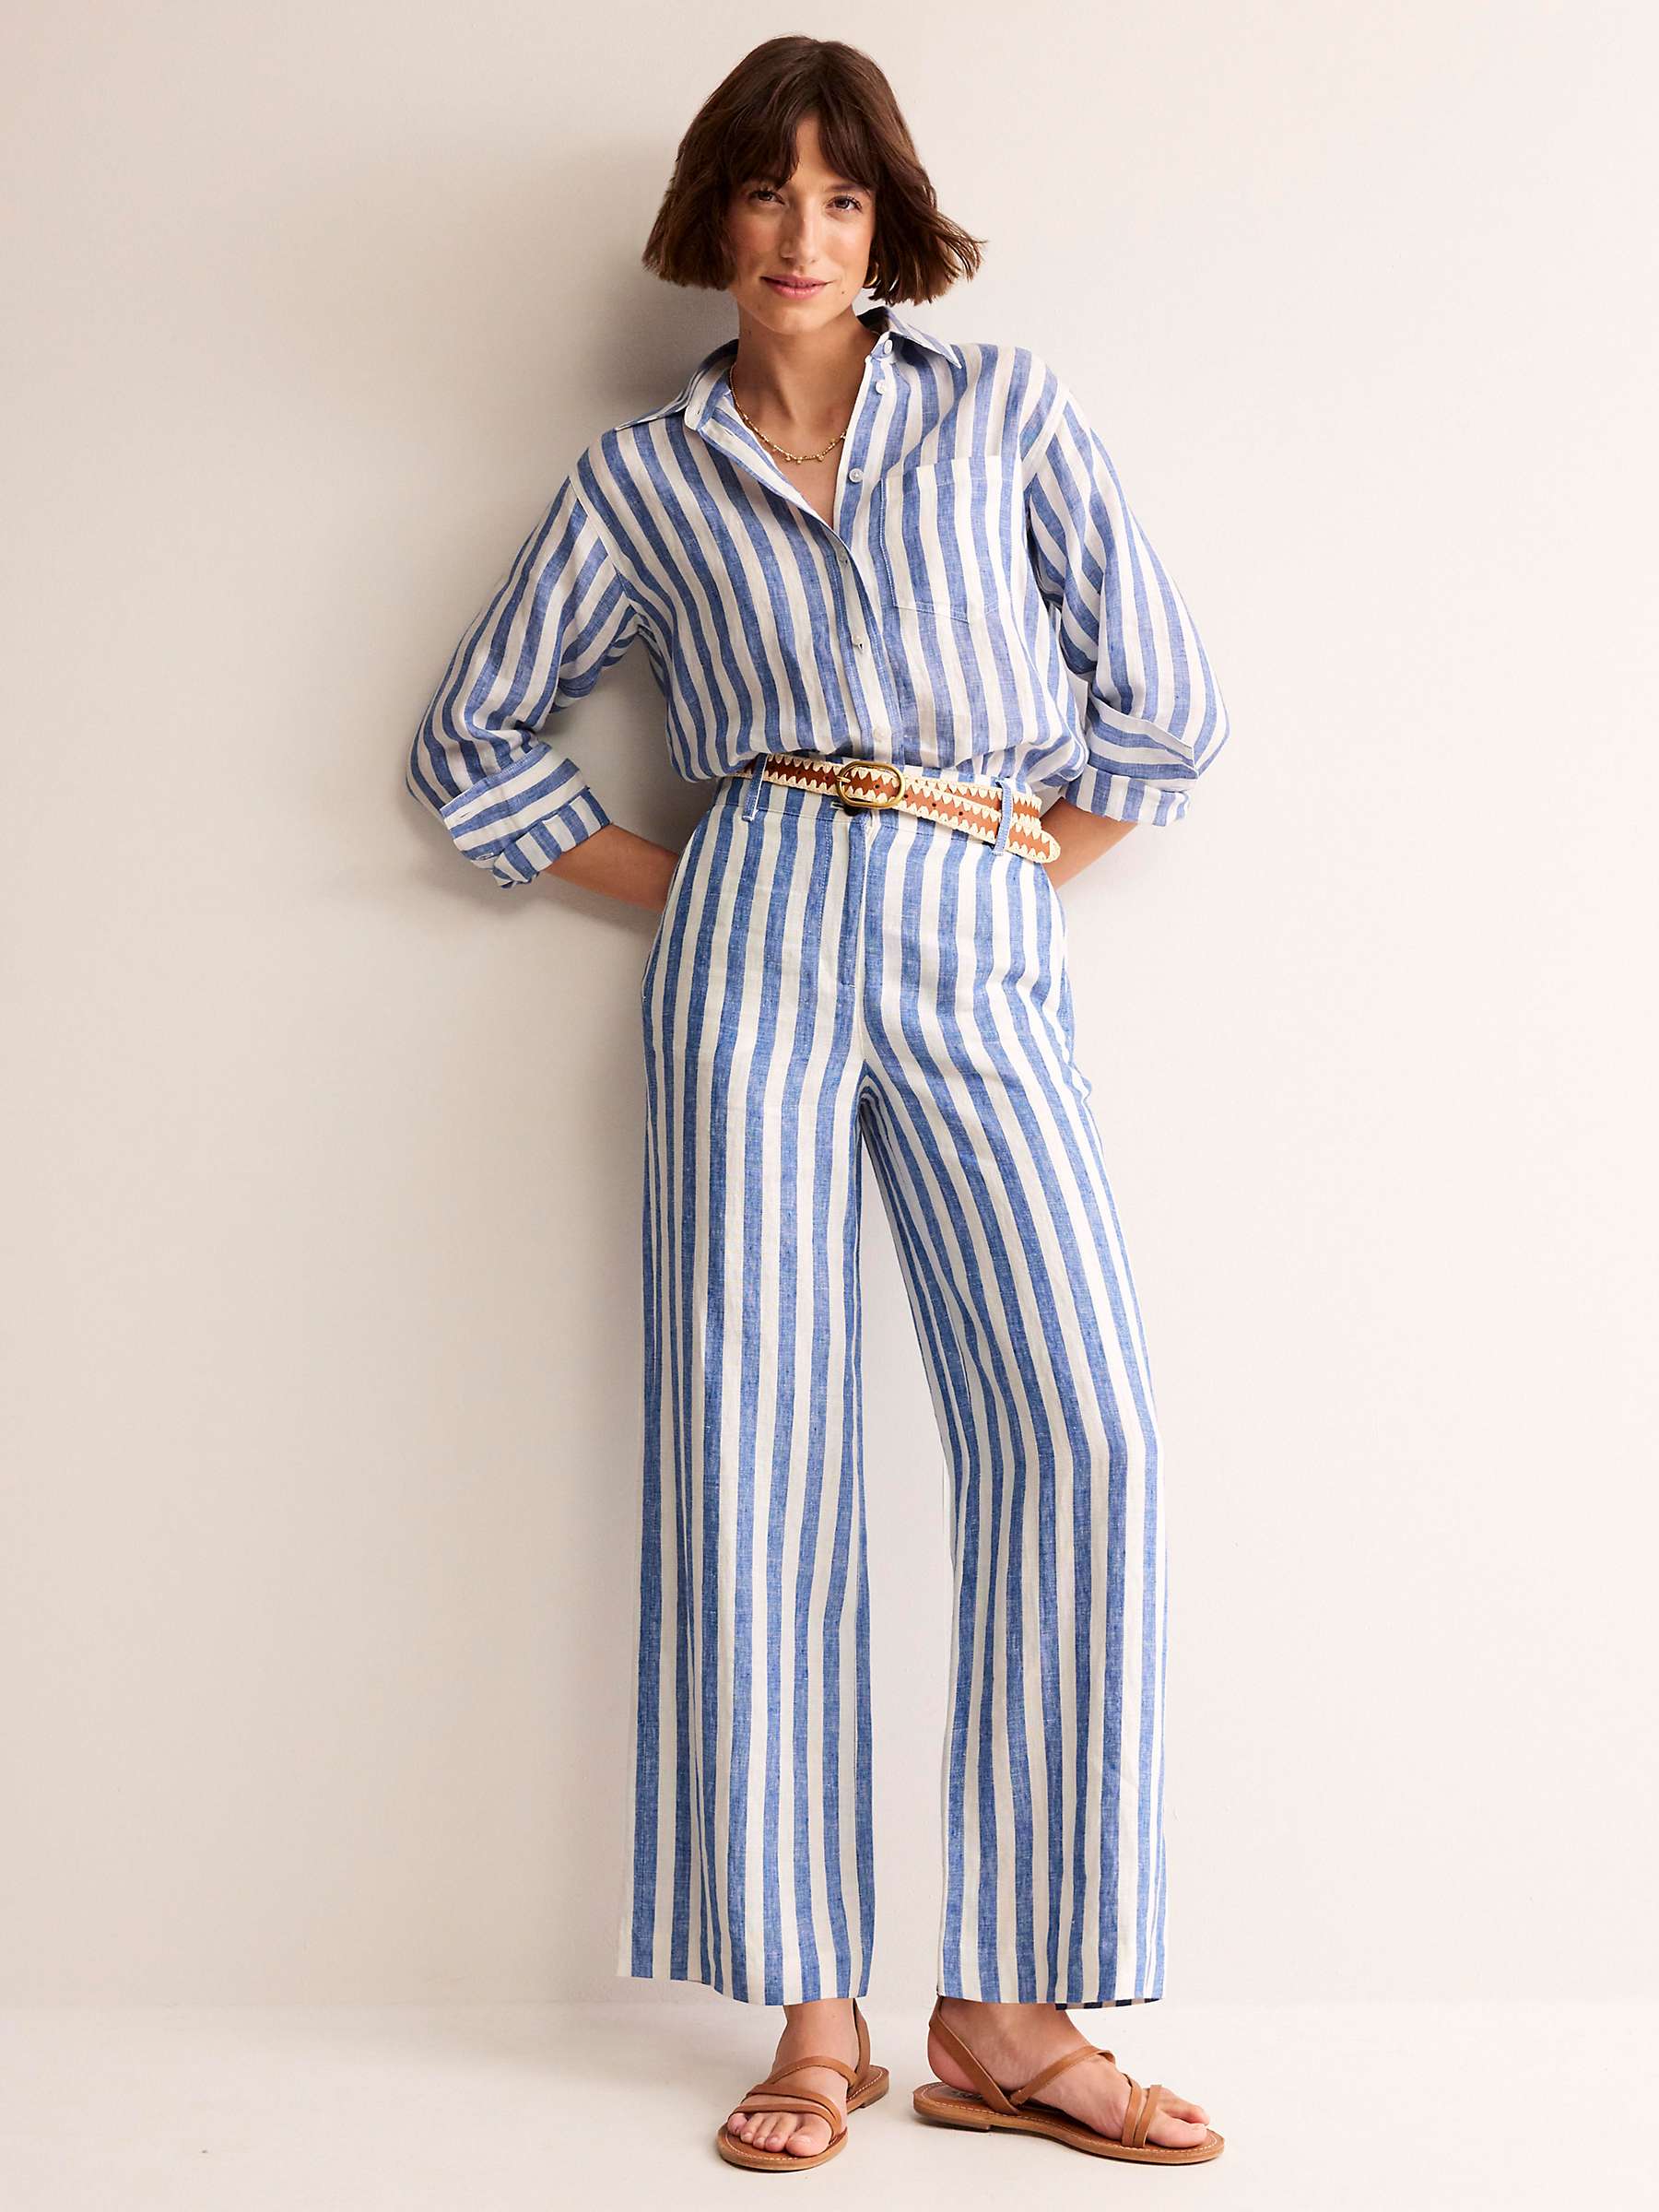 Buy Boden Westbourne Linen Trousers, Blue/White Online at johnlewis.com